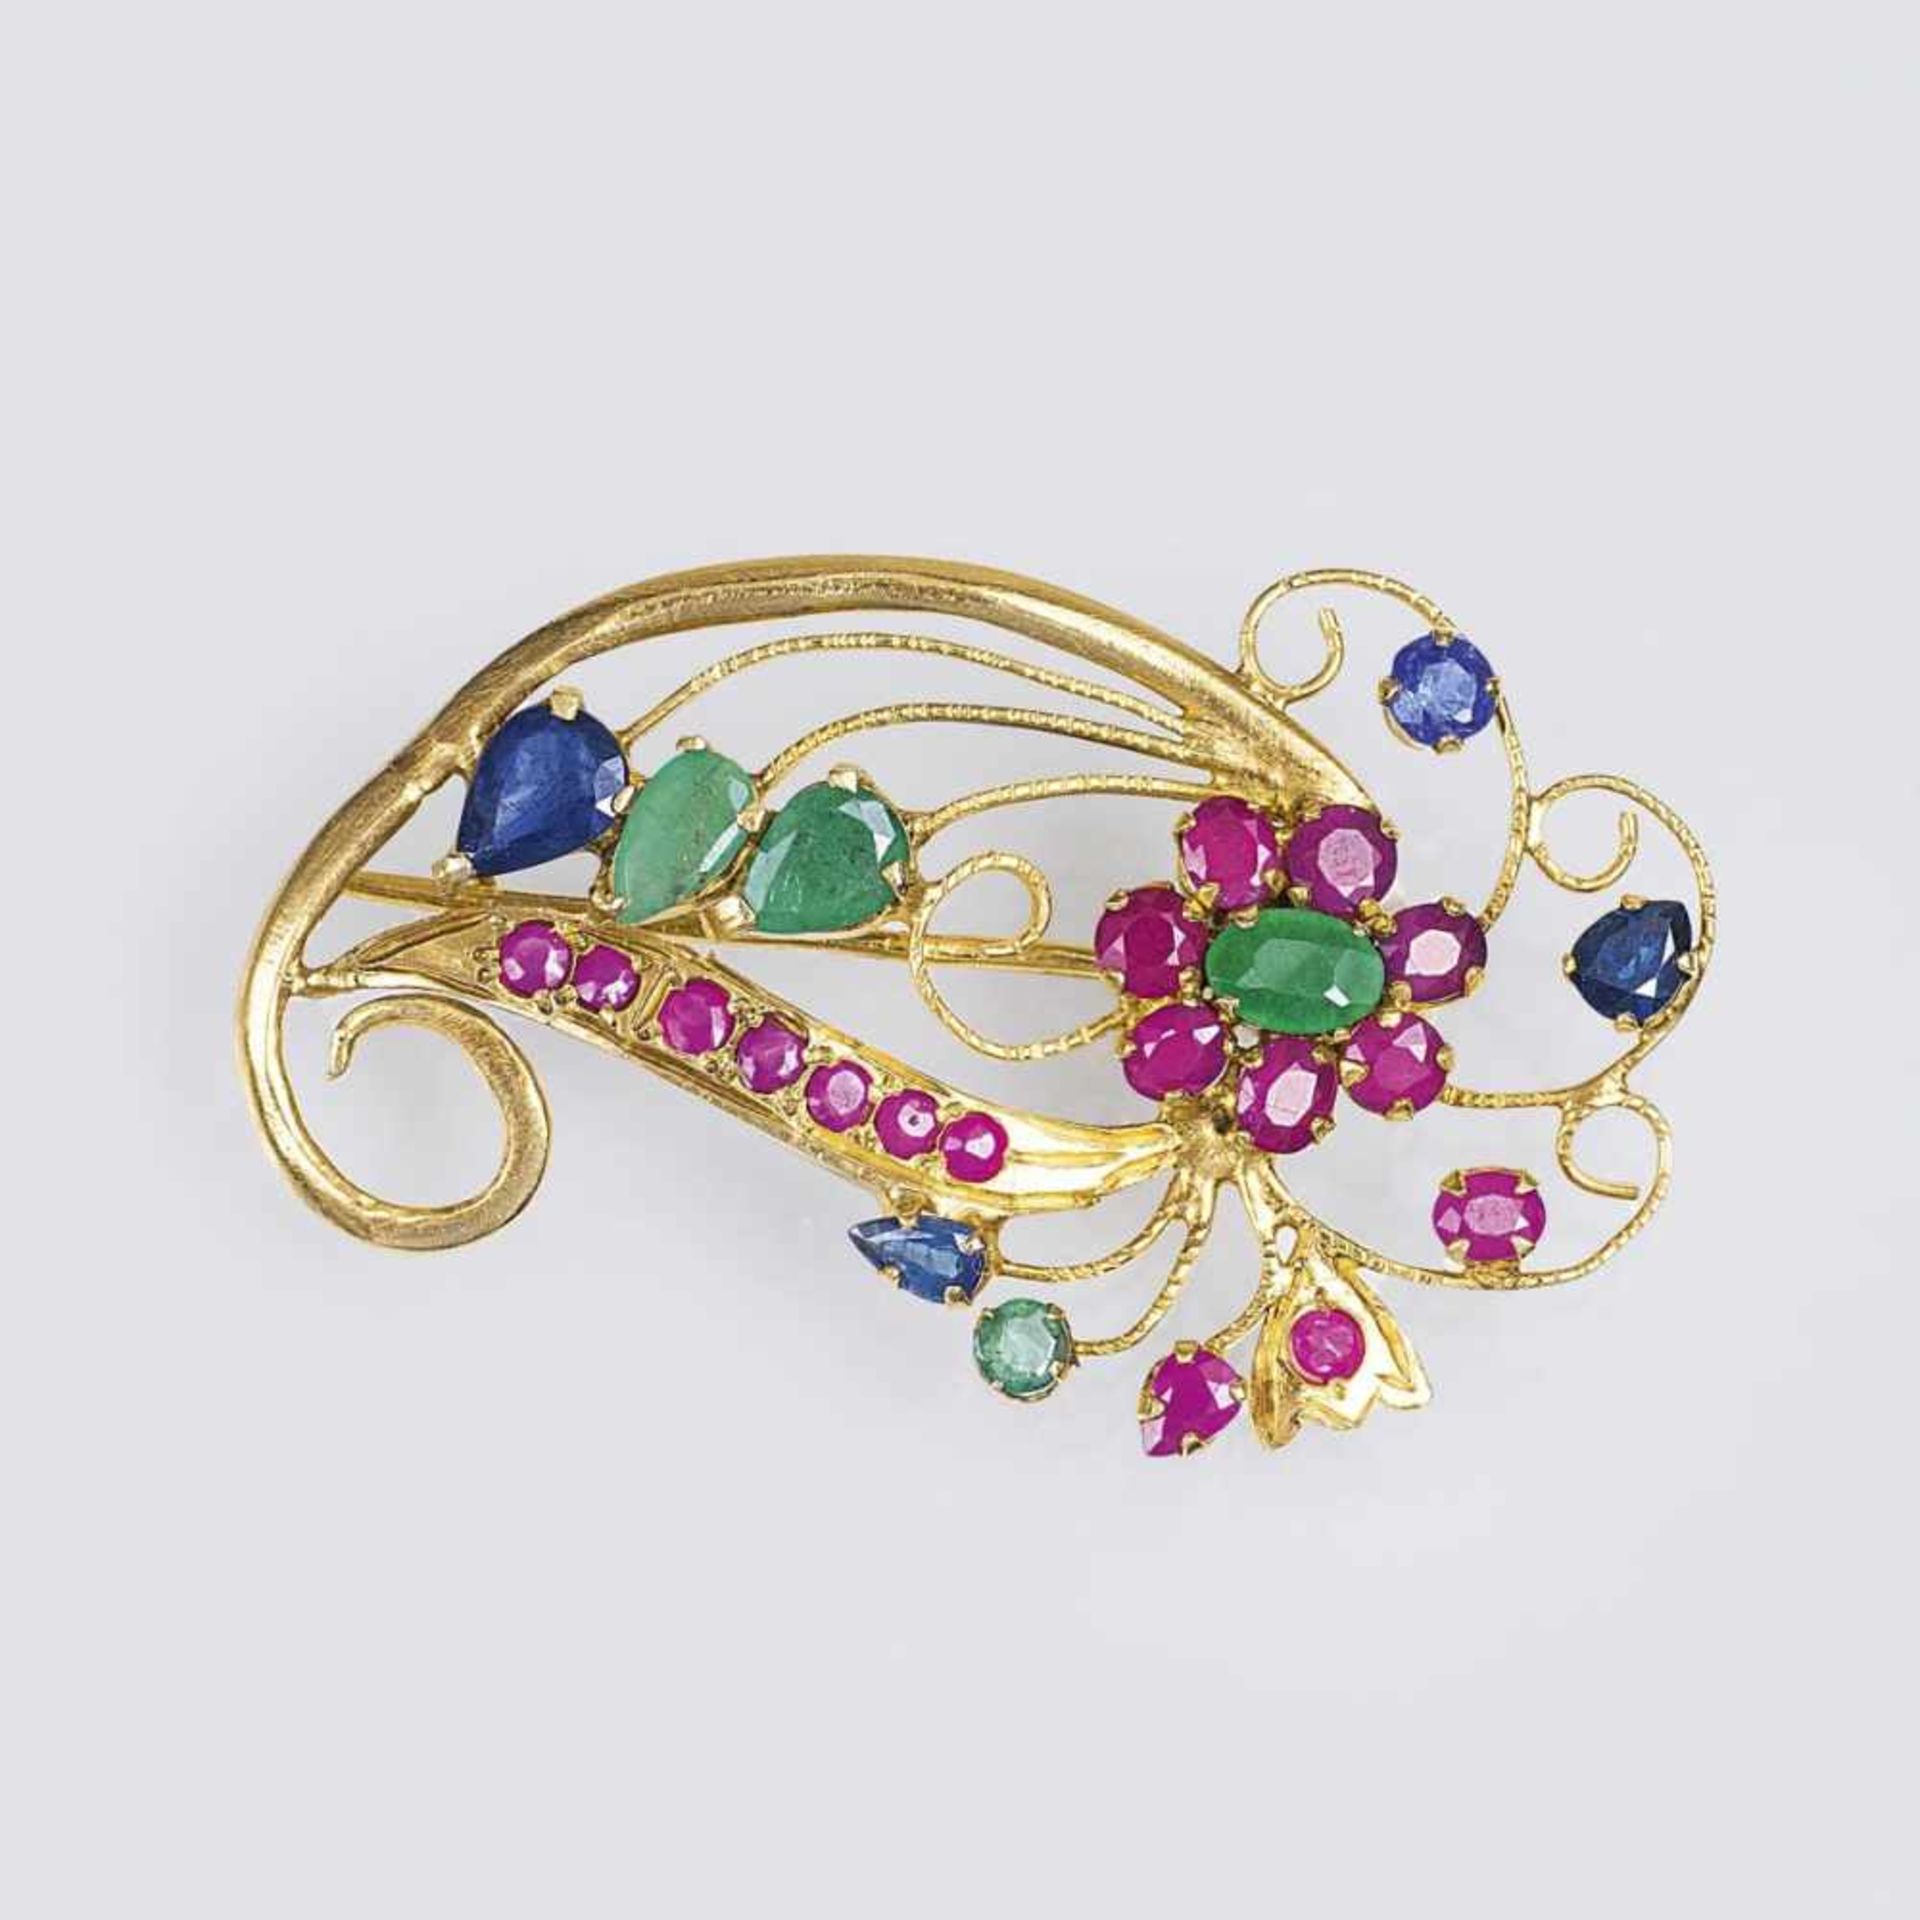 A Vintage Precious Stones Brooch with Rubies and Emeralds14 ct. yellow gold. With 3 sapphires, 17